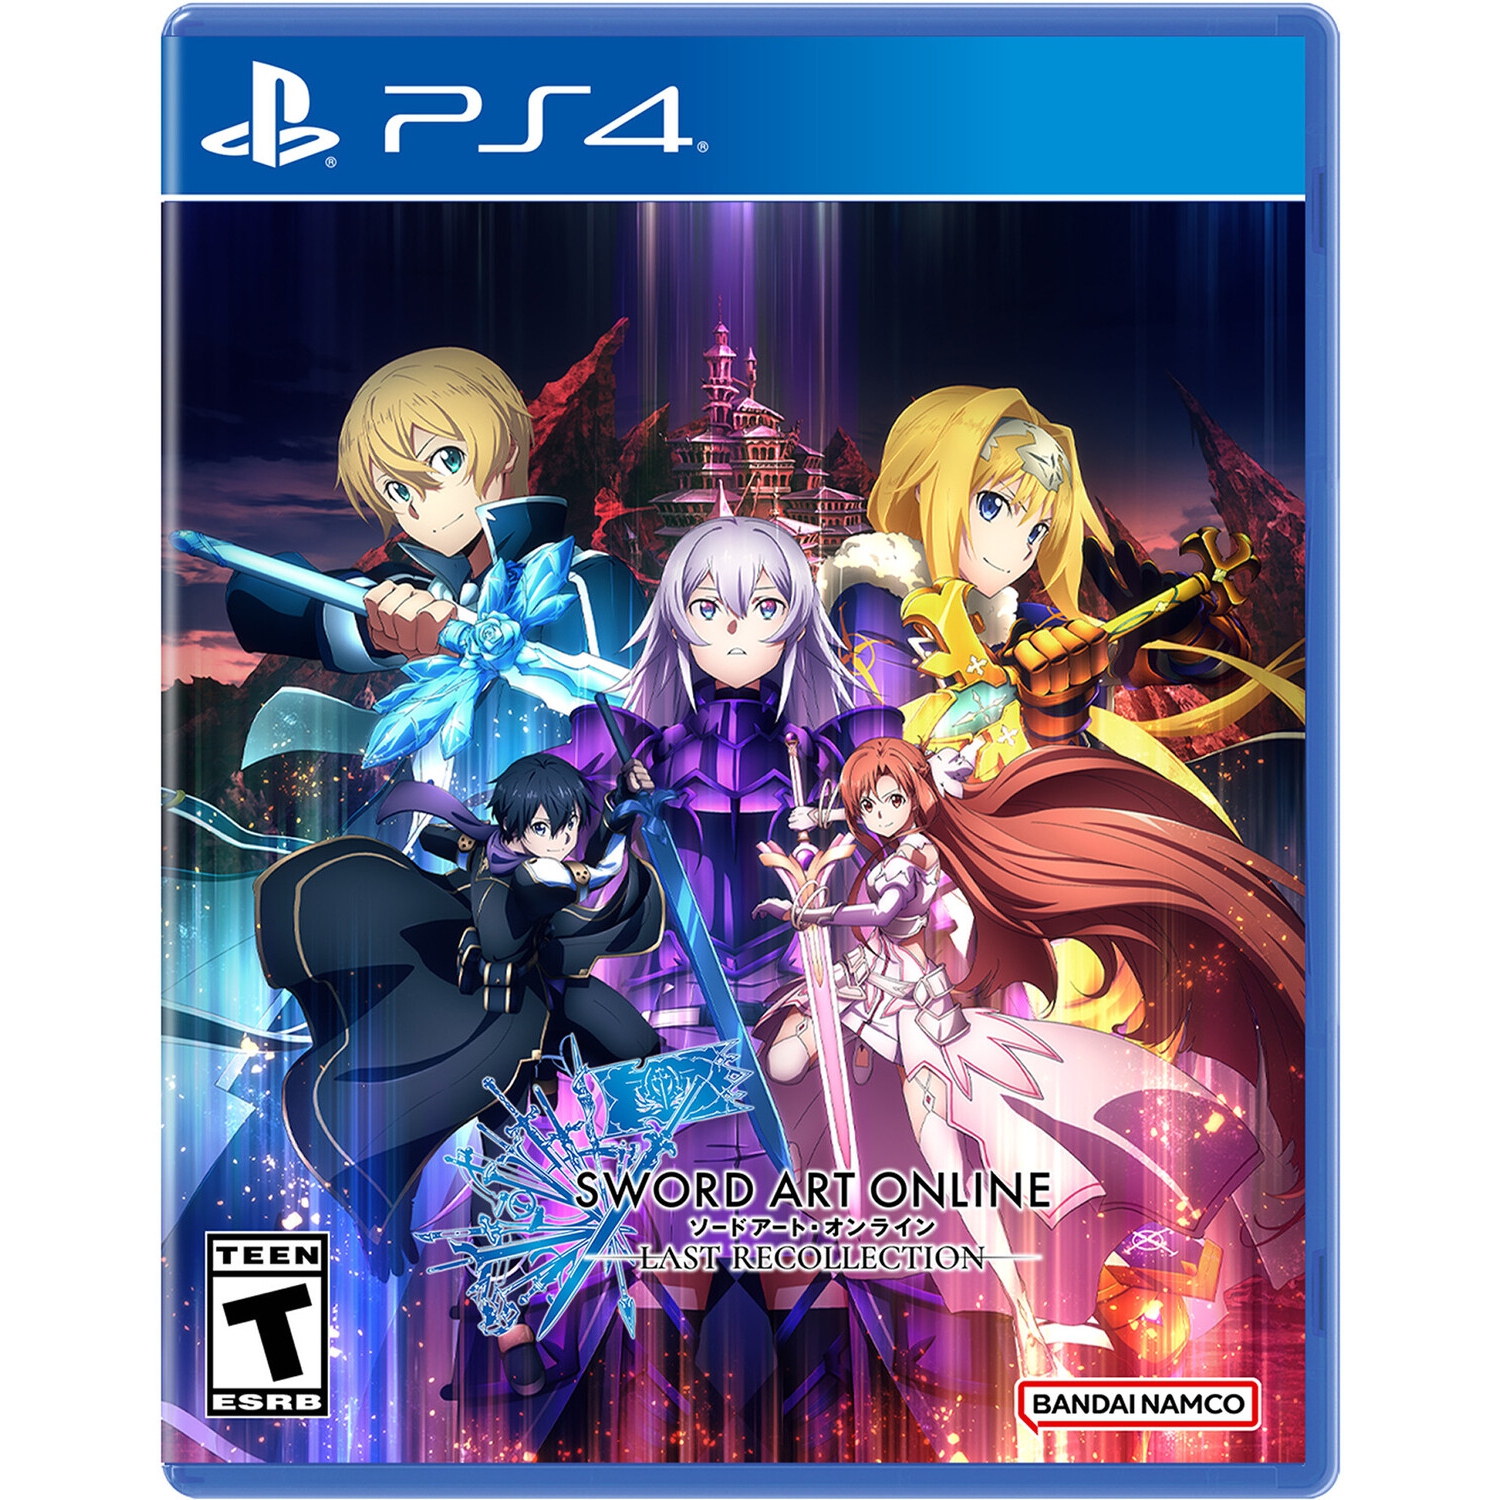 Sword Art Online Last Recollection for PlayStation 4 [VIDEOGAMES]